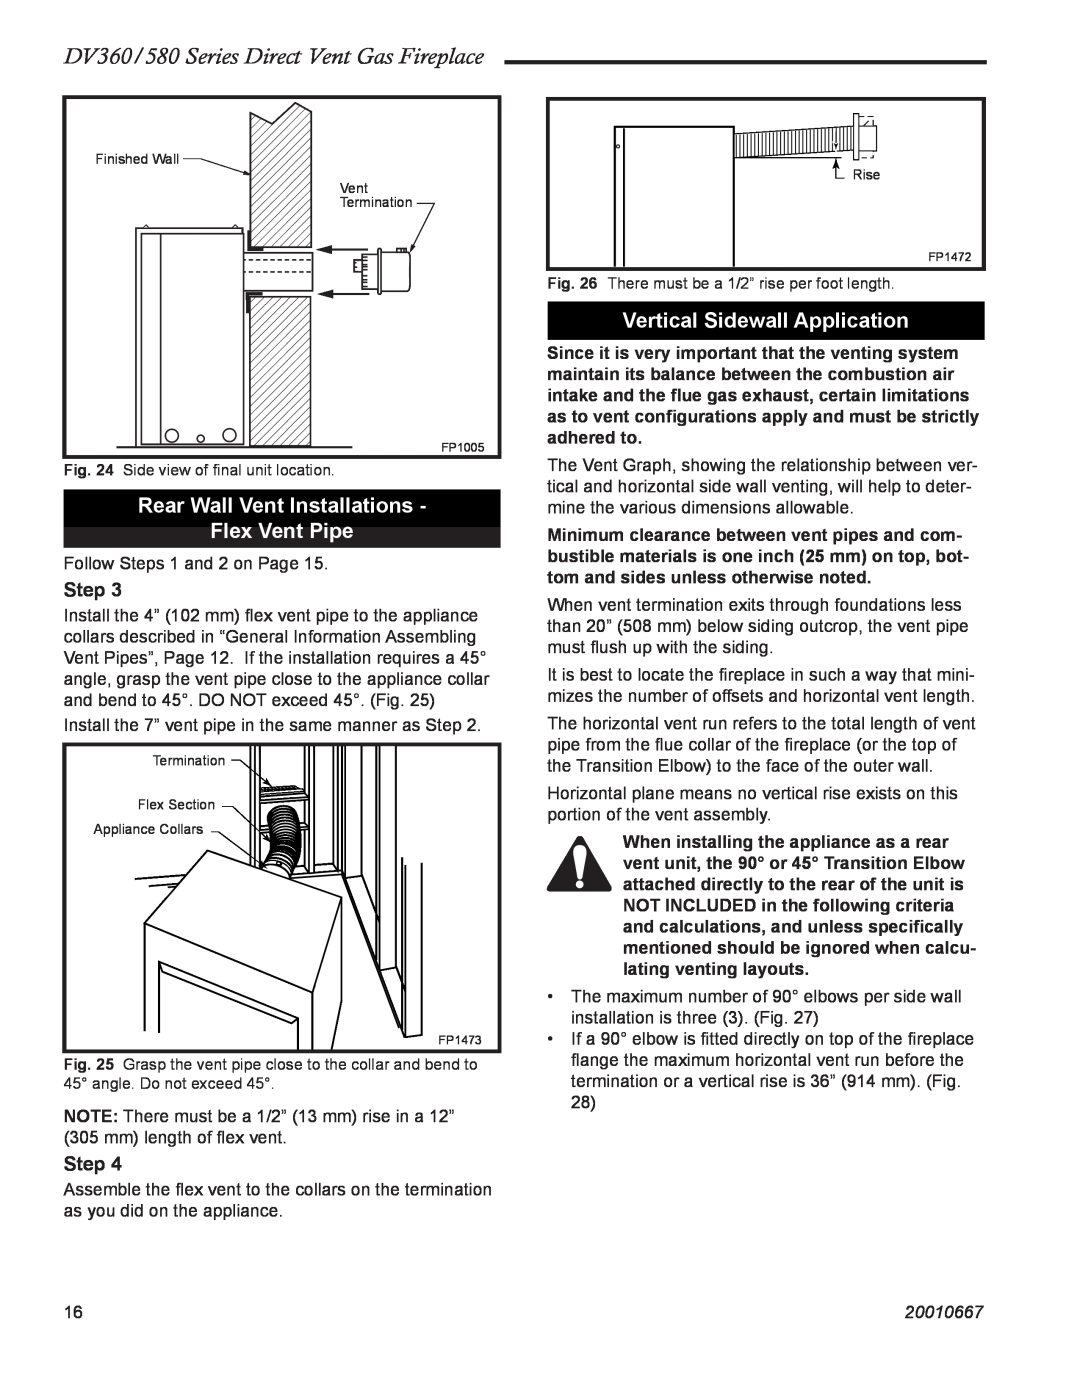 Vermont Casting DV580 manual Rear Wall Vent Installations Flex Vent Pipe, Vertical Sidewall Application, Step, 20010667 